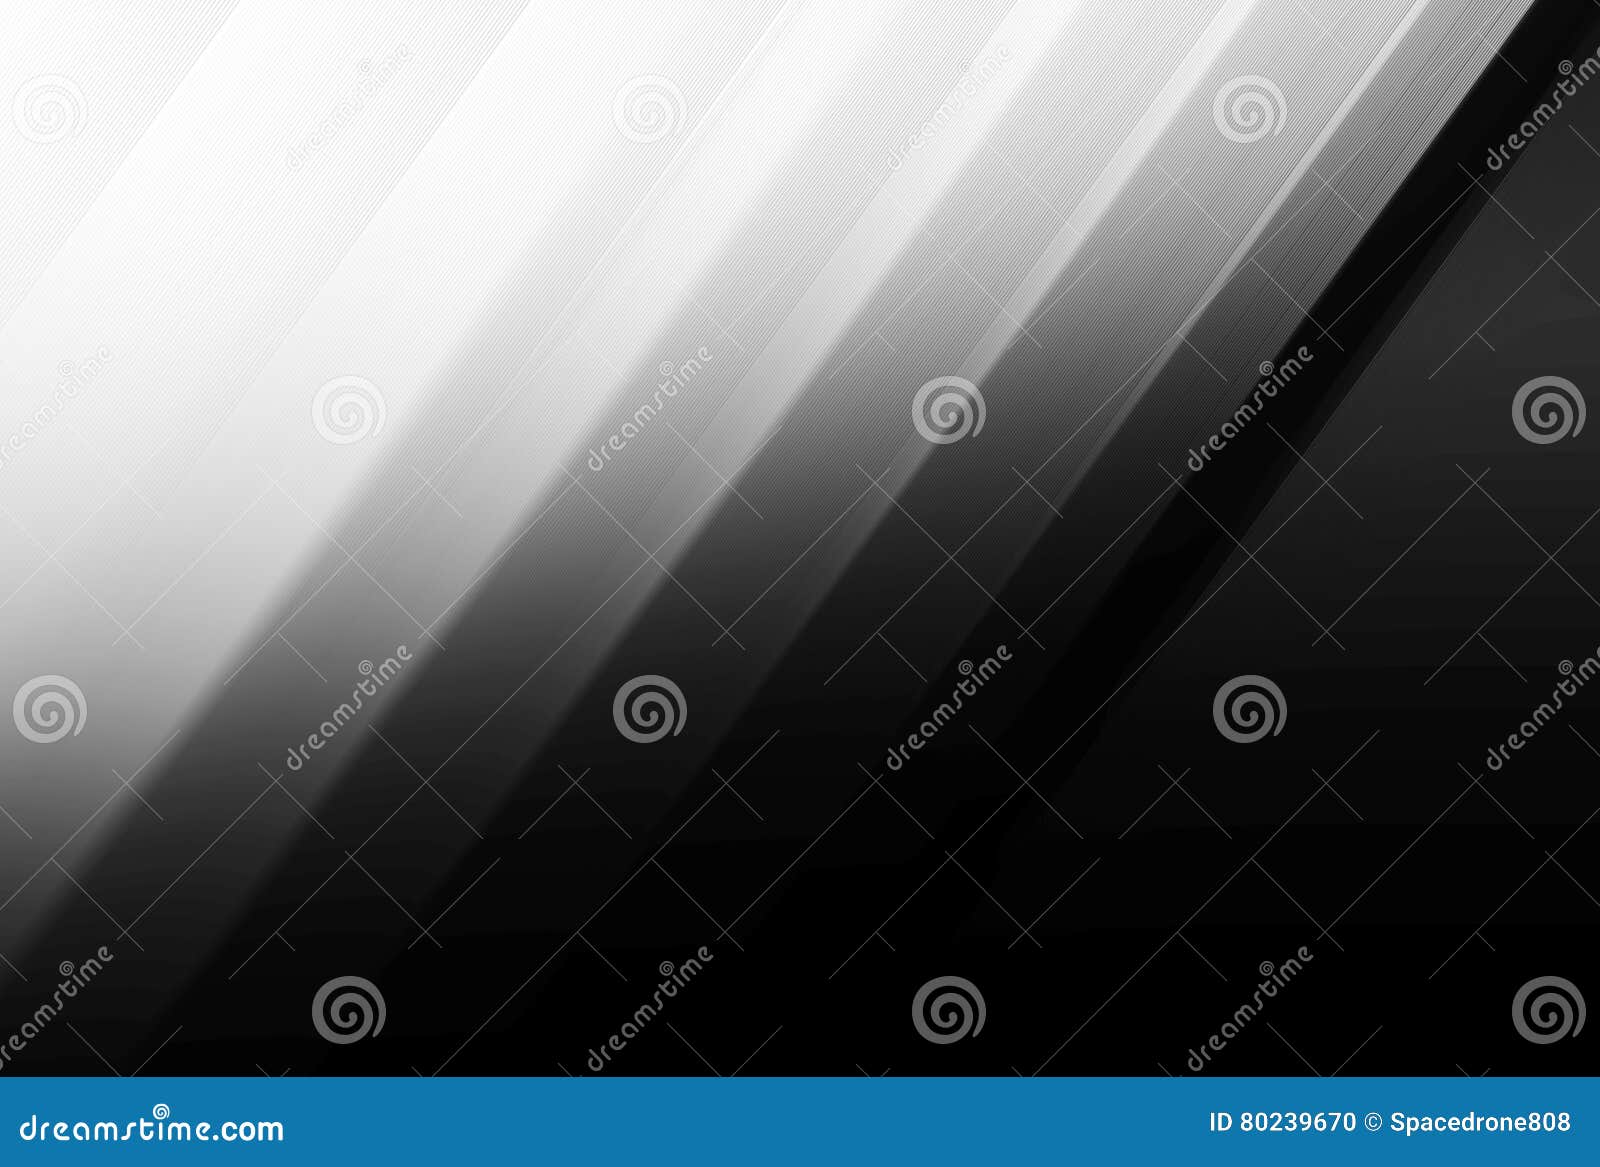 Blur Black And White Background Hd